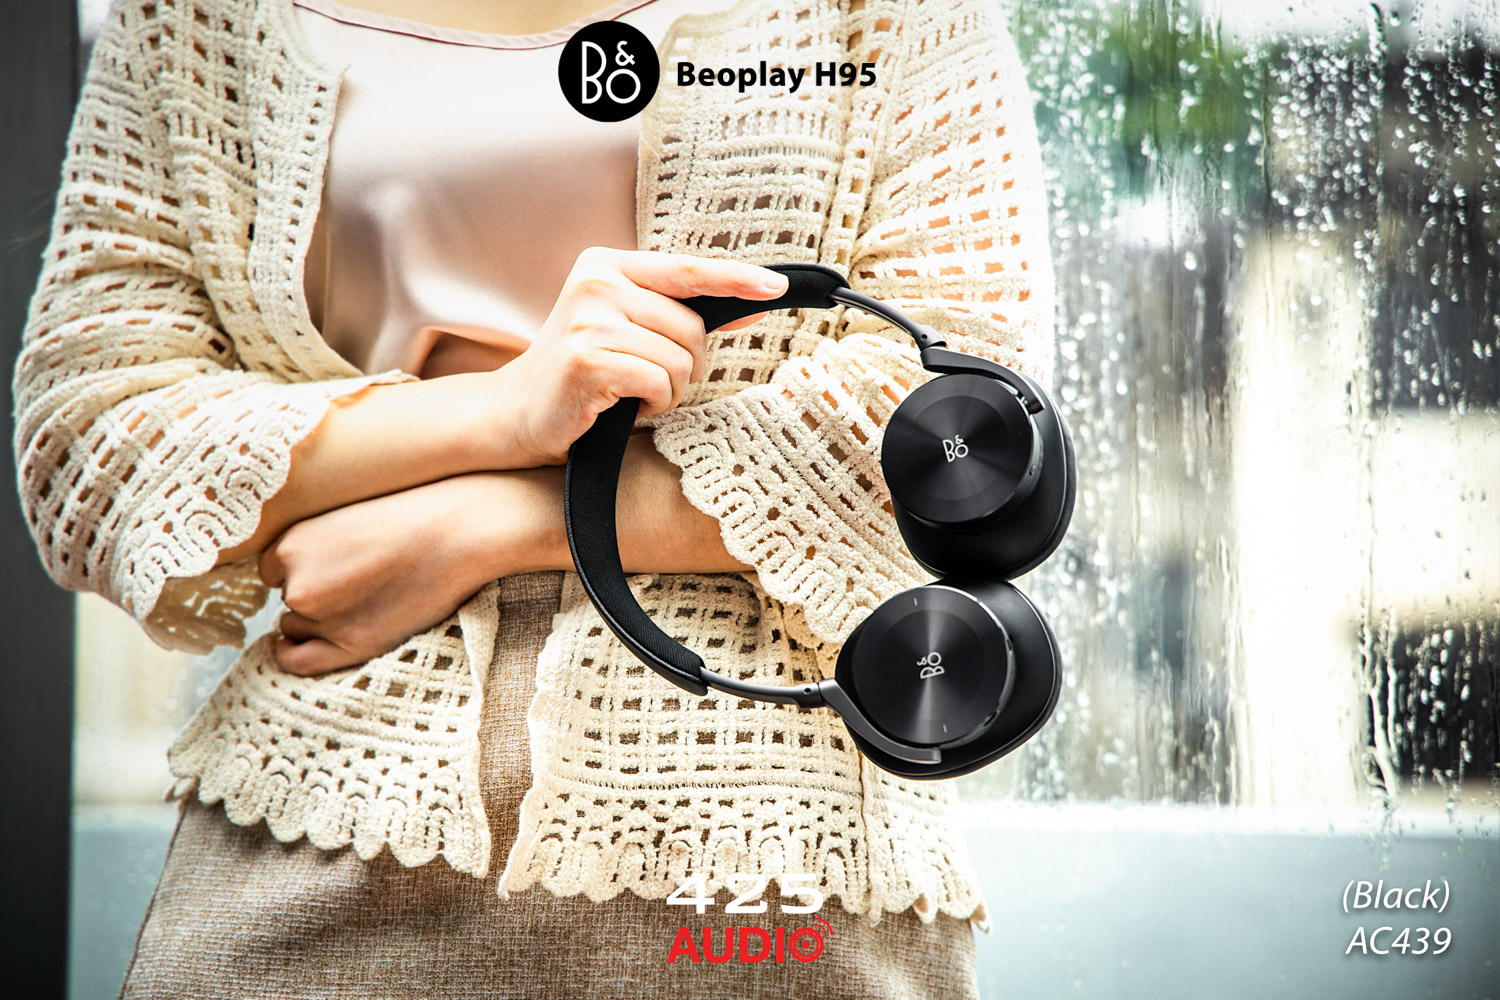 B&O_bang_and_olufsen_beoplay_h95_anc_active_noise_cancellation_wireless_headphones